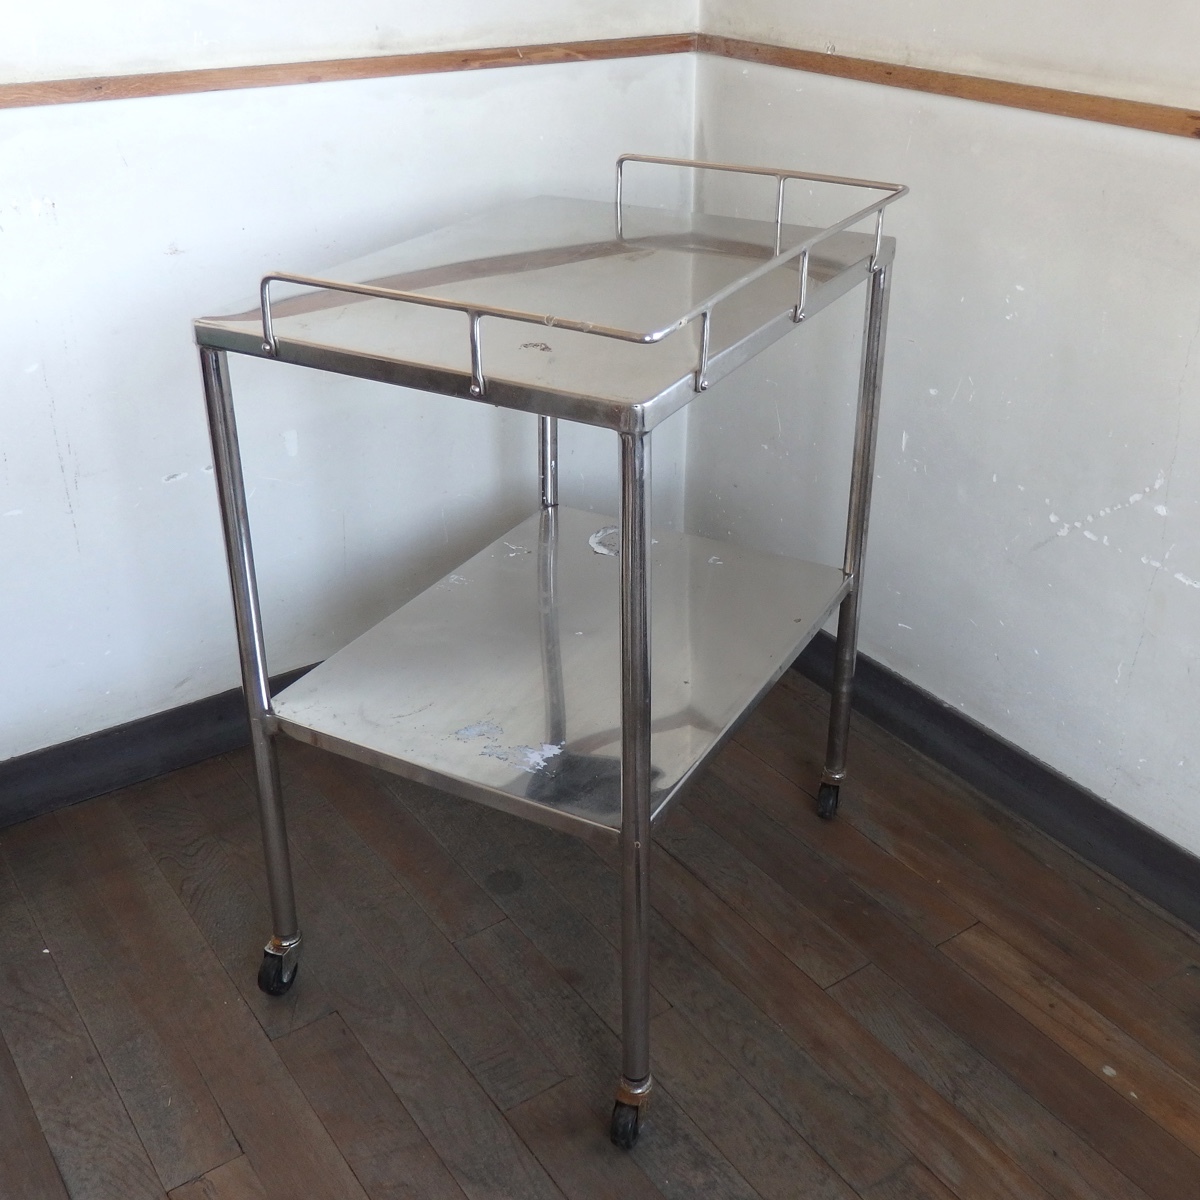  stainless steel Wagon 2 step with casters used medical care apparatus antique retro Junk industry series 